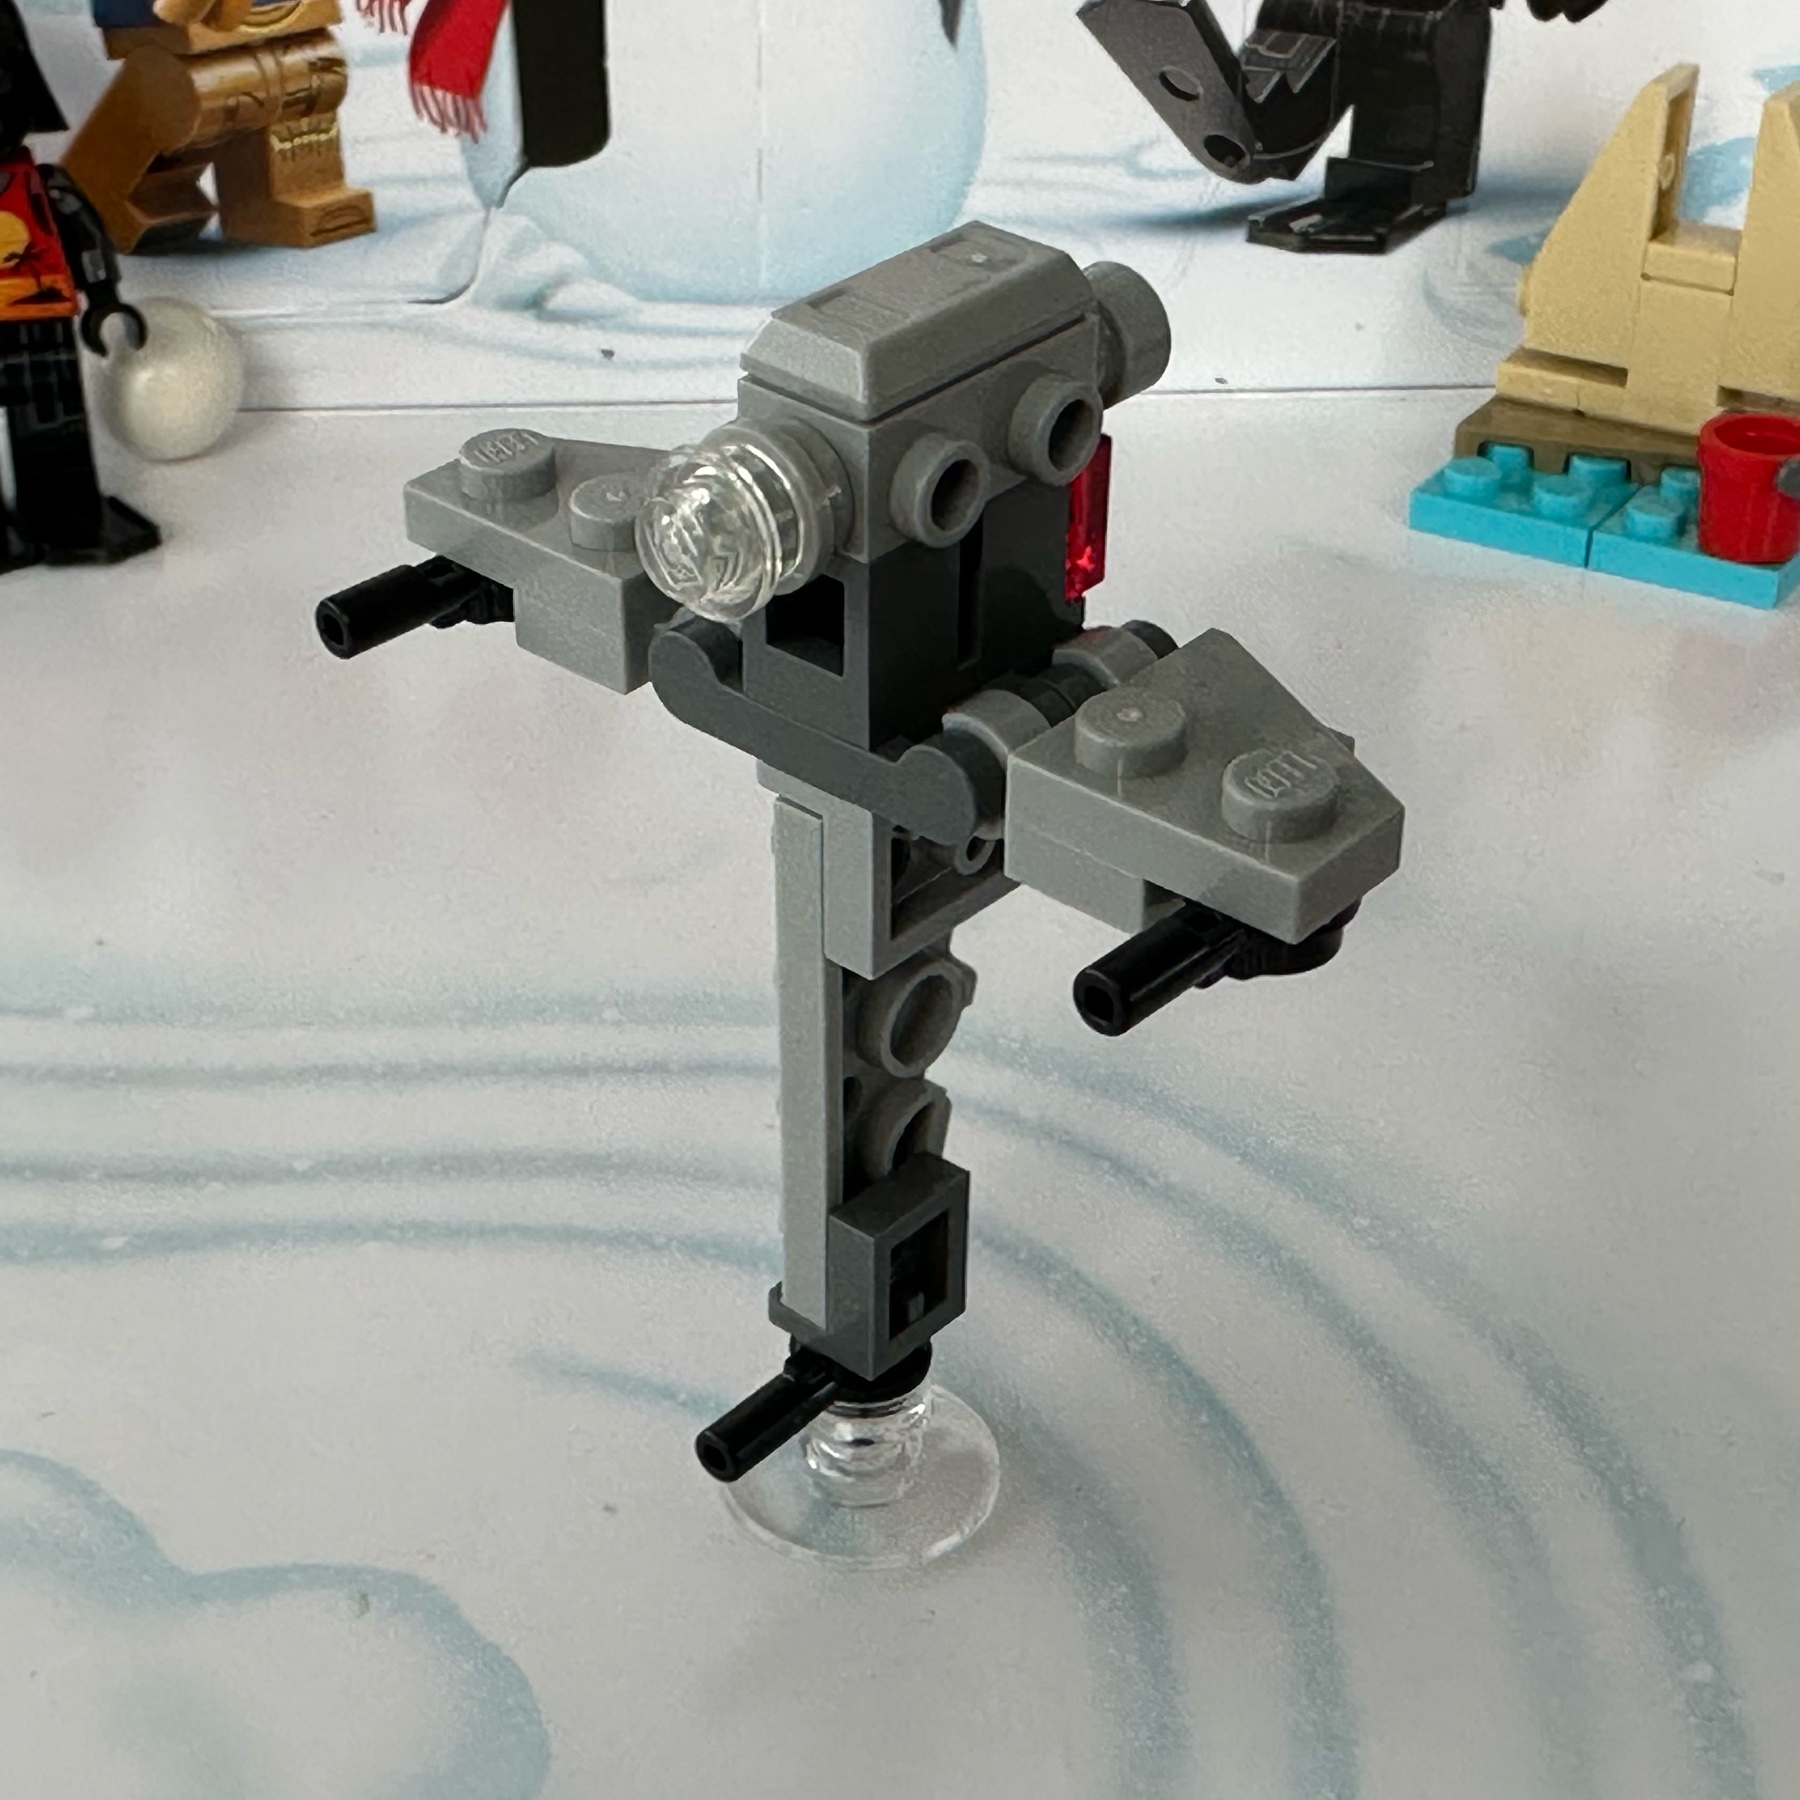 A micro-scale LEGO model of a Star Wars B-Wing fighter posed vertically.